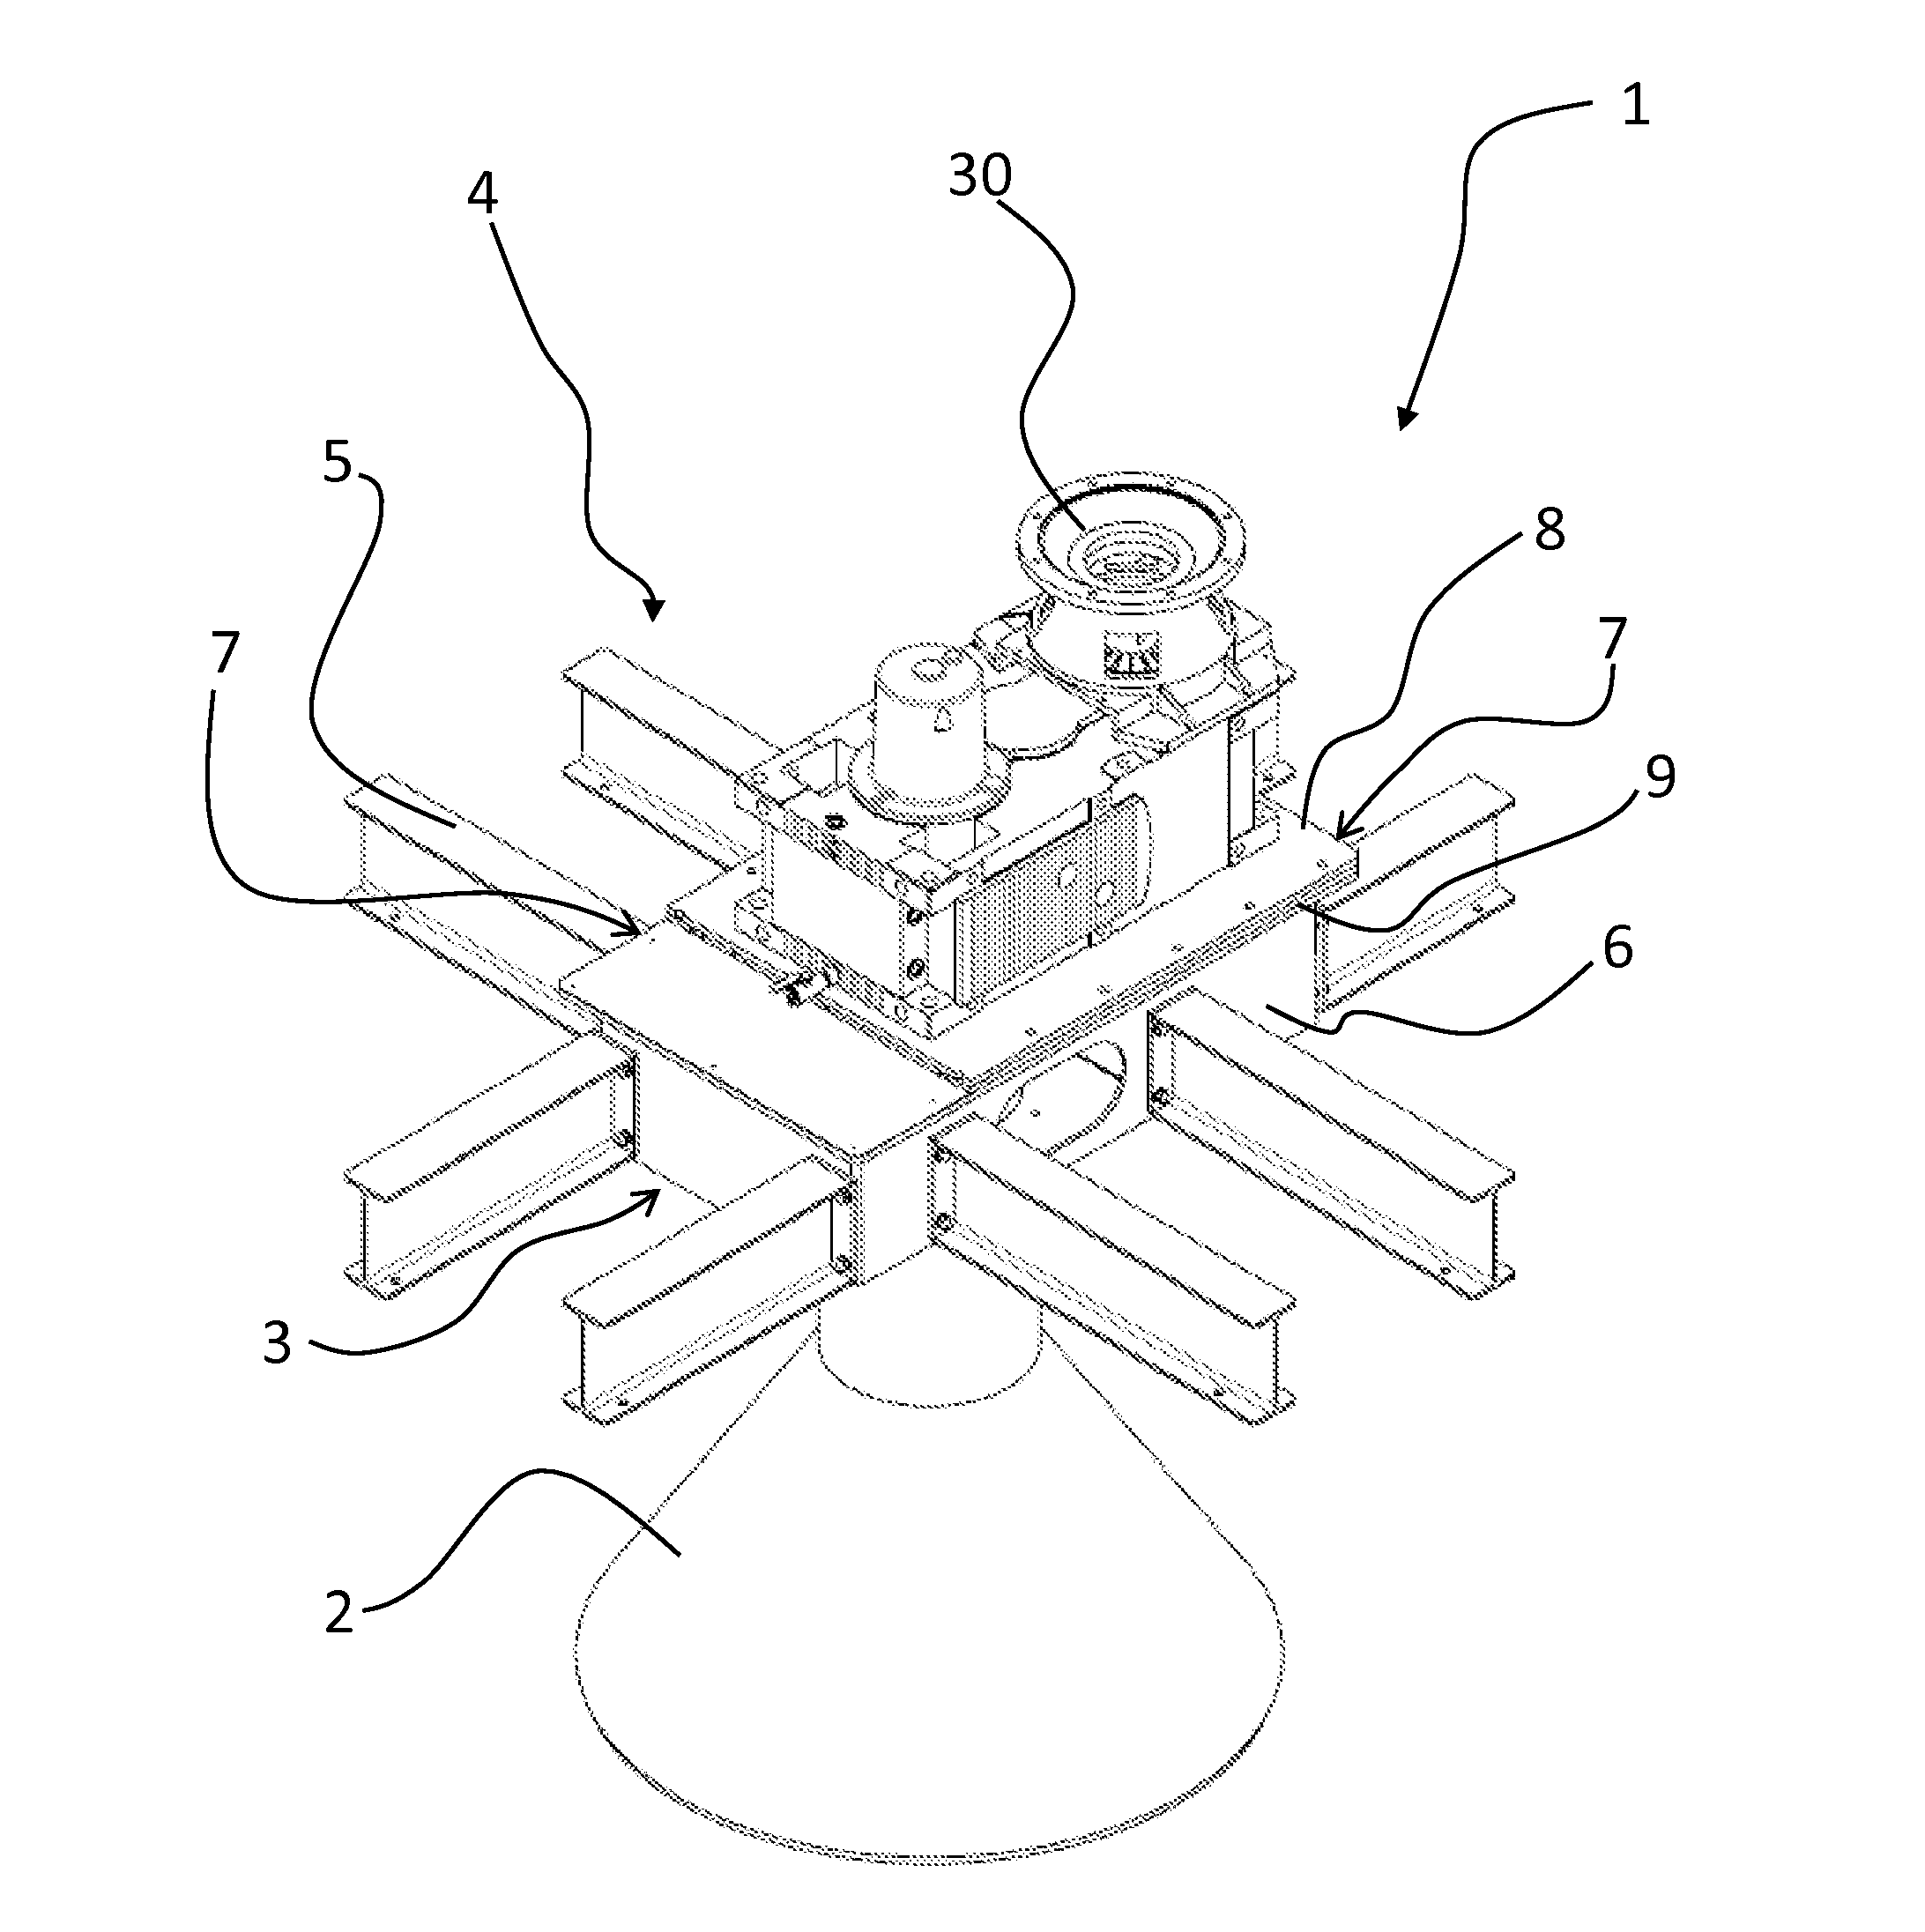 A drive supporting structure and a drive support element